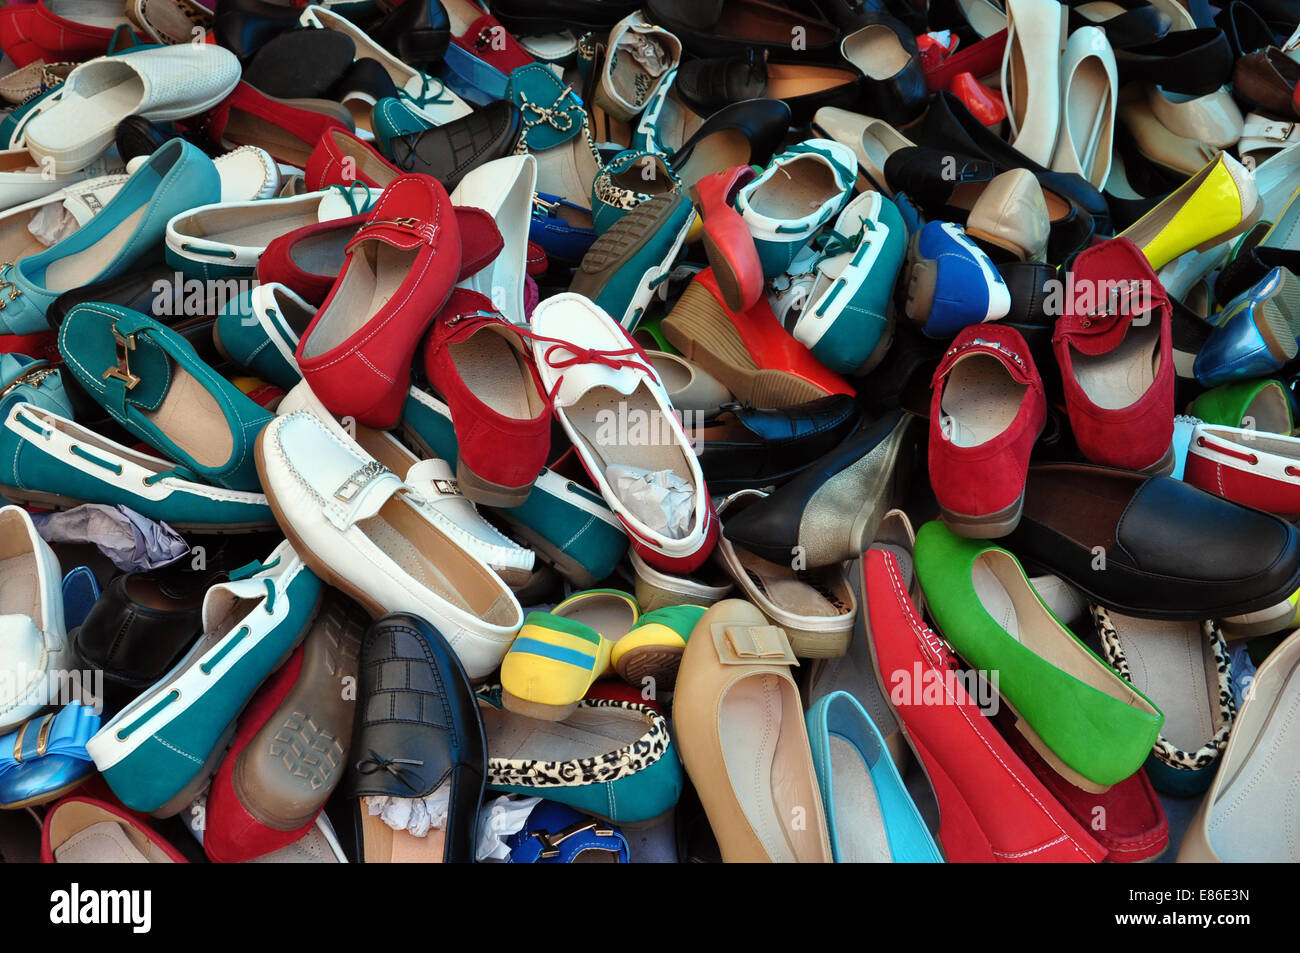 Shoes for sale at street market. Pile of assorted footwear abstract background. Stock Photo